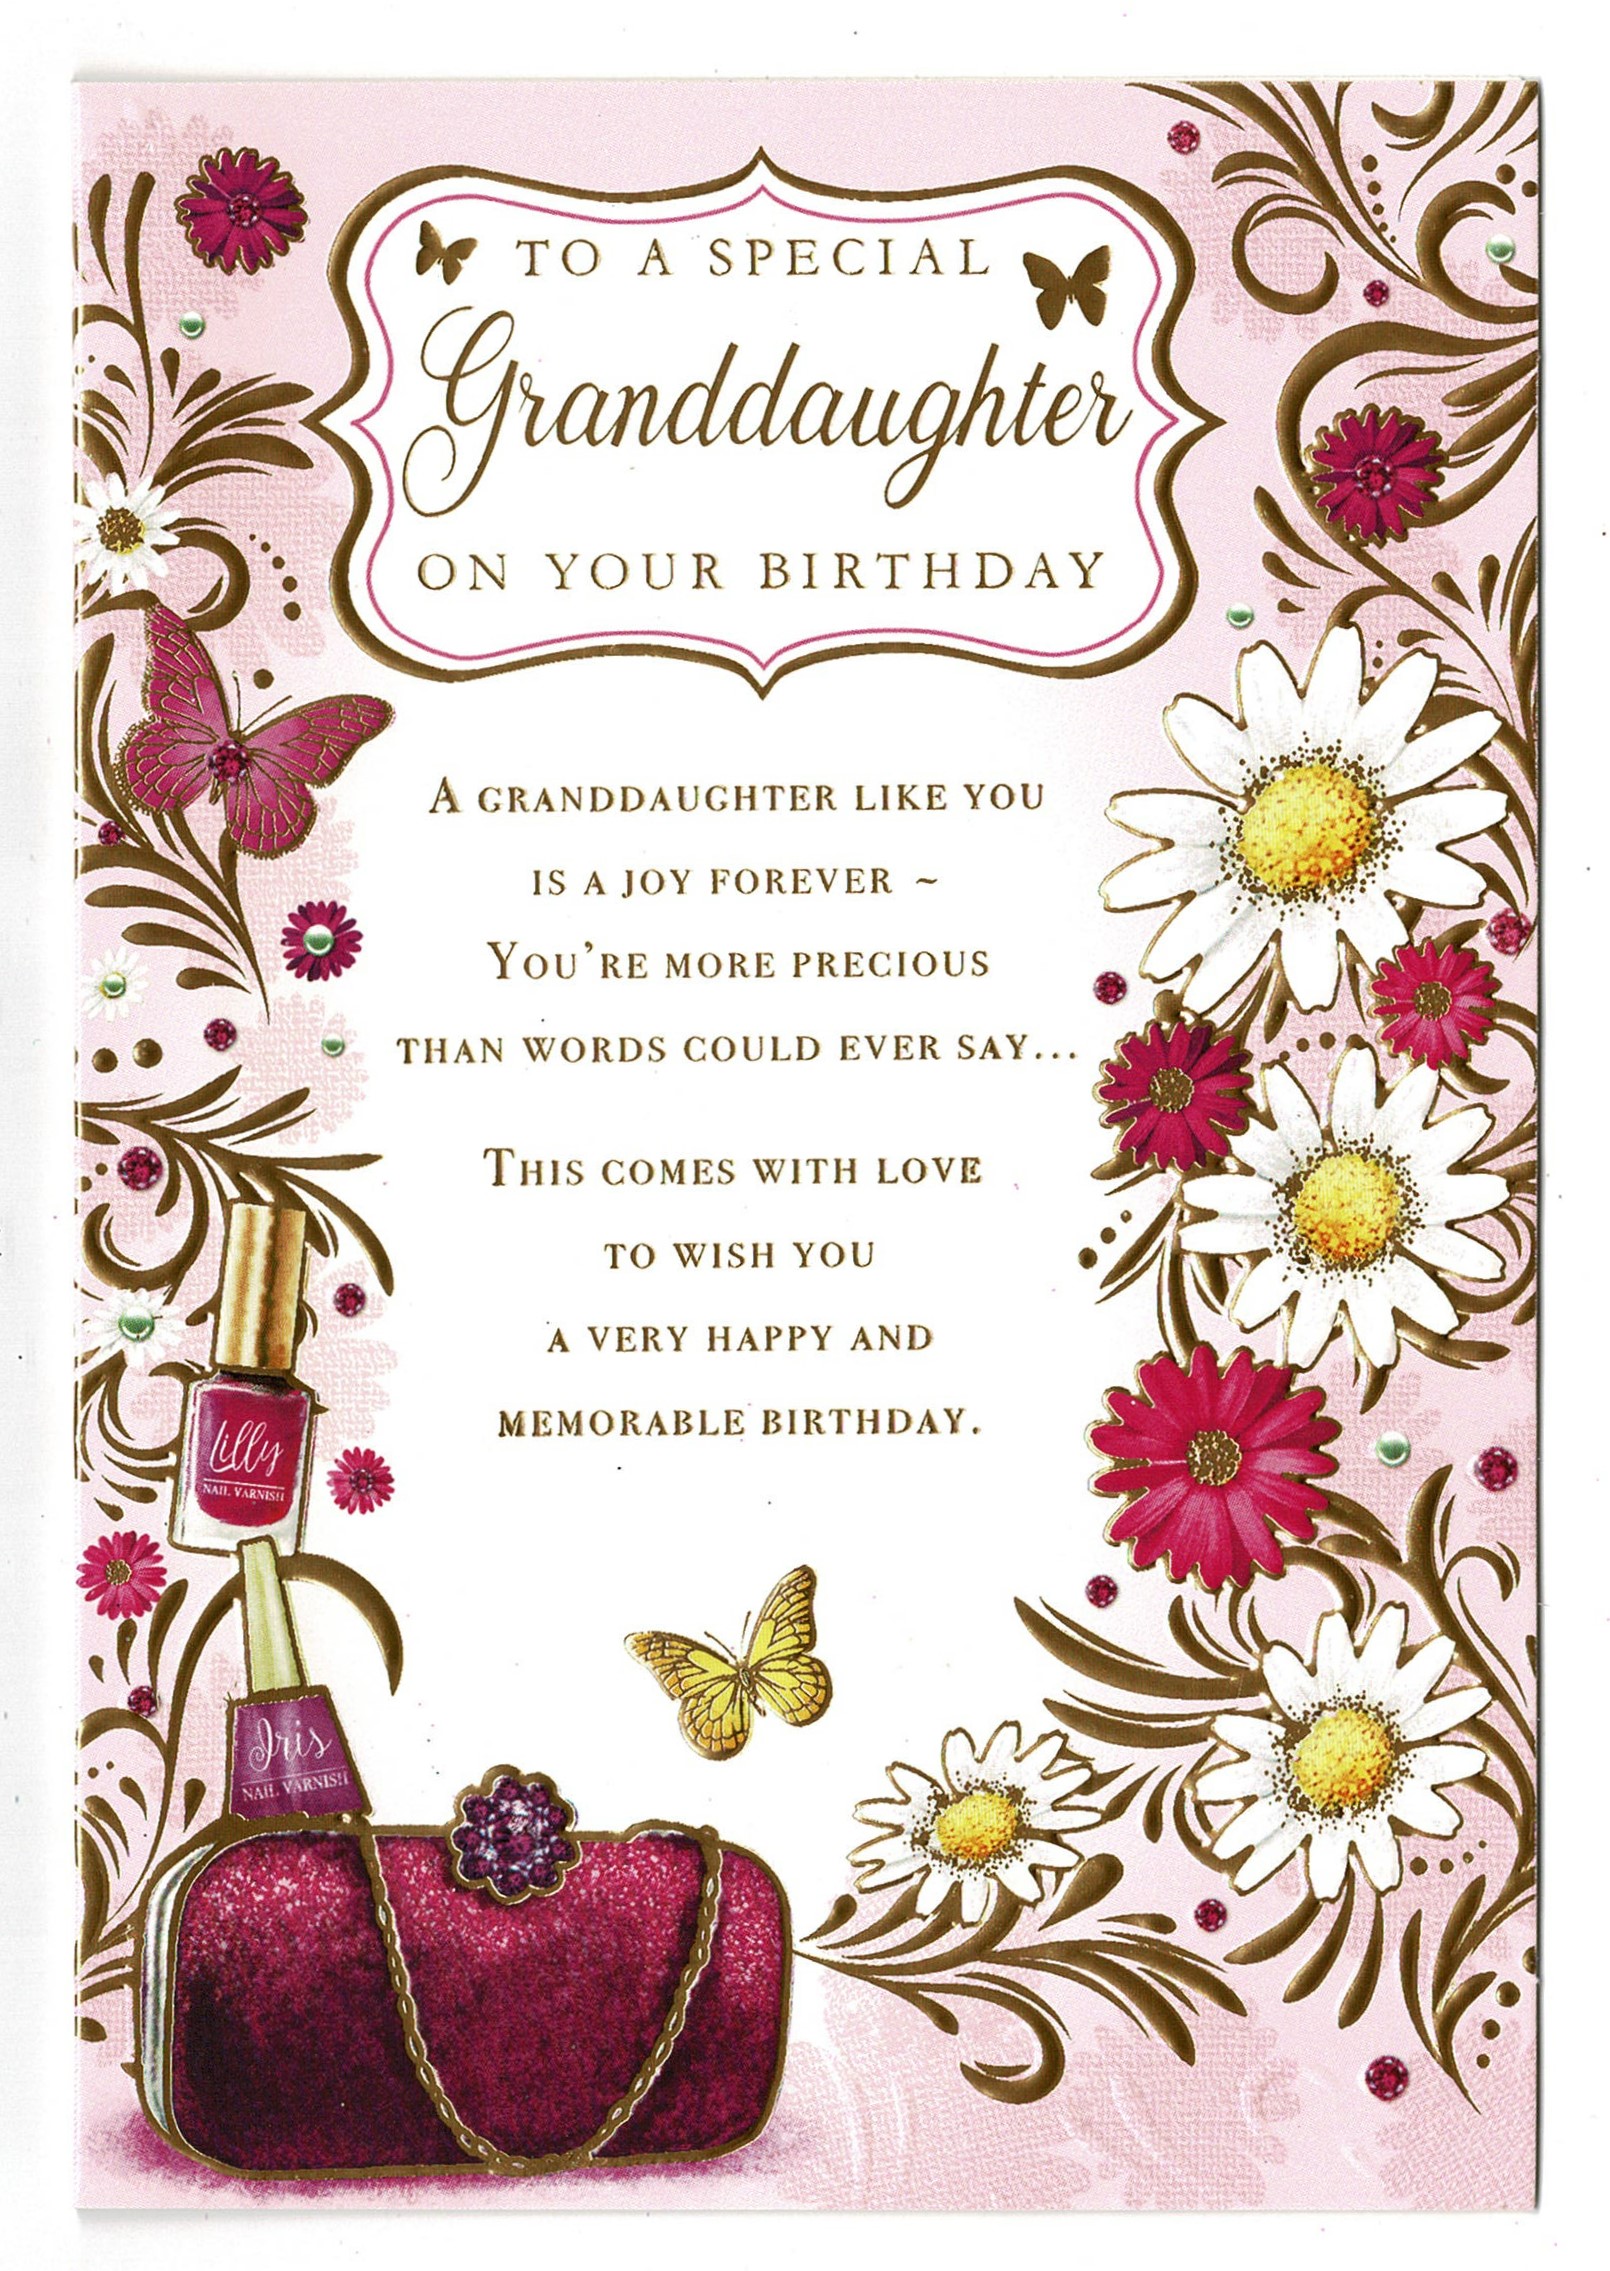 Granddaughter Birthday Card ' To A Special Granddaughter On Your ...